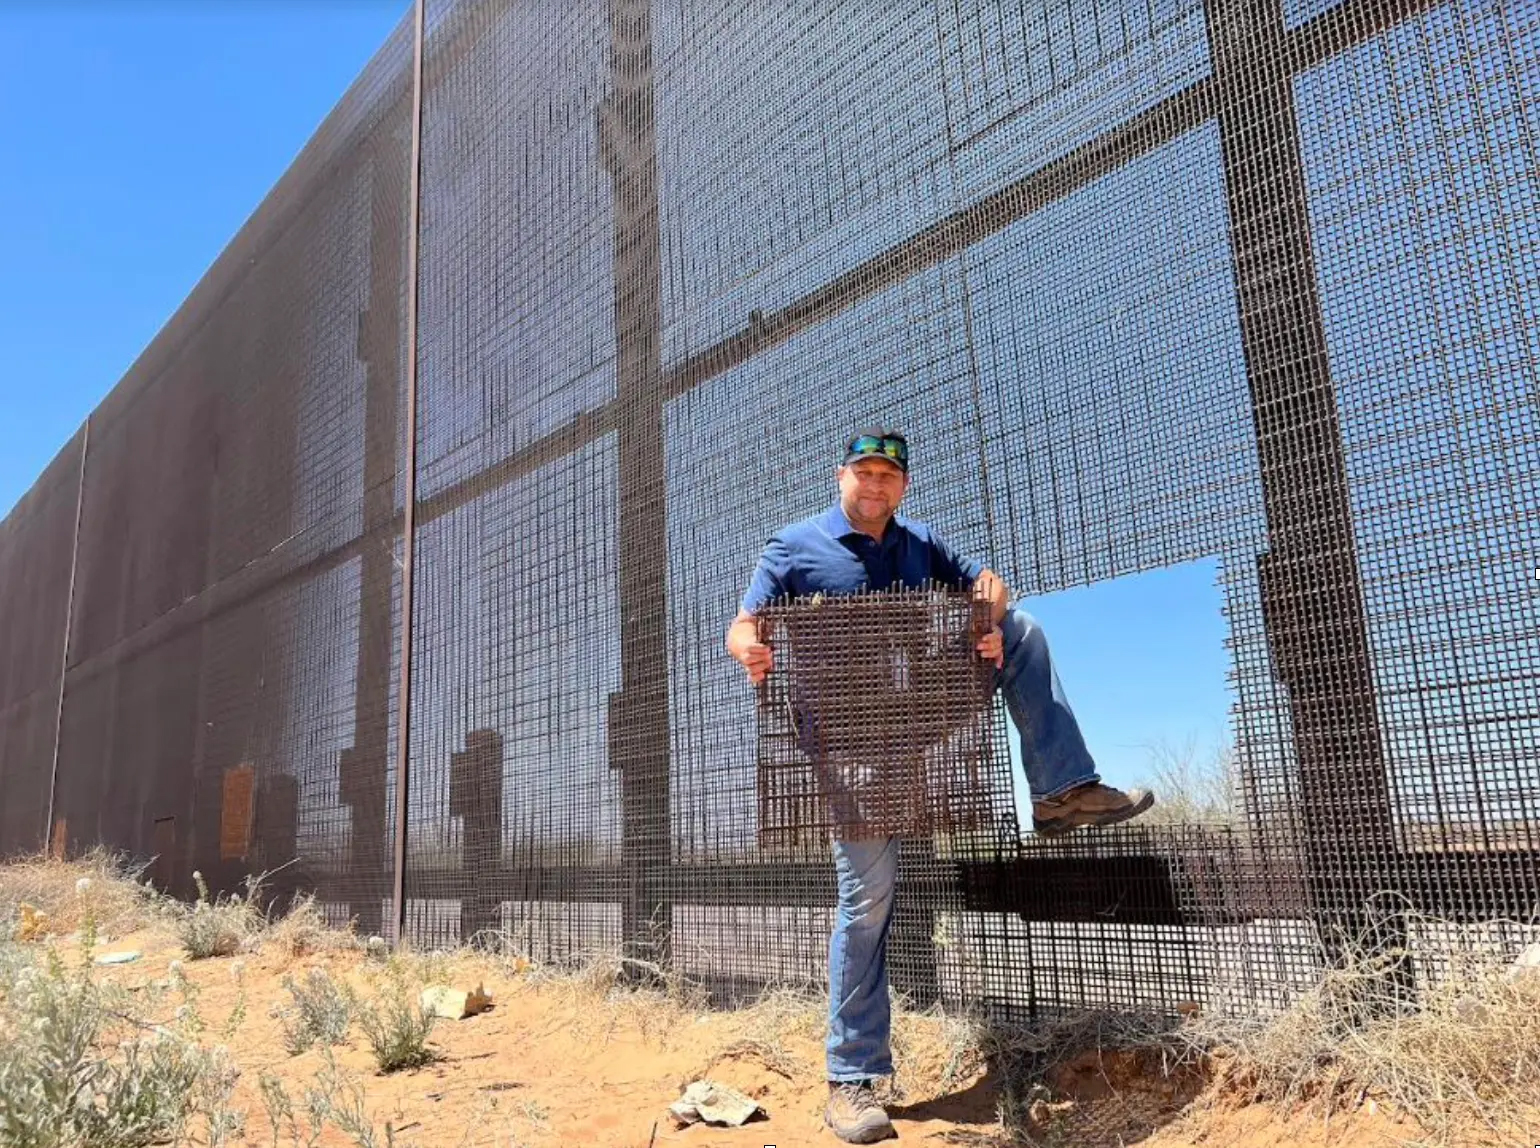 Todd Bensman holds up cut up piece at the USA Mexican border